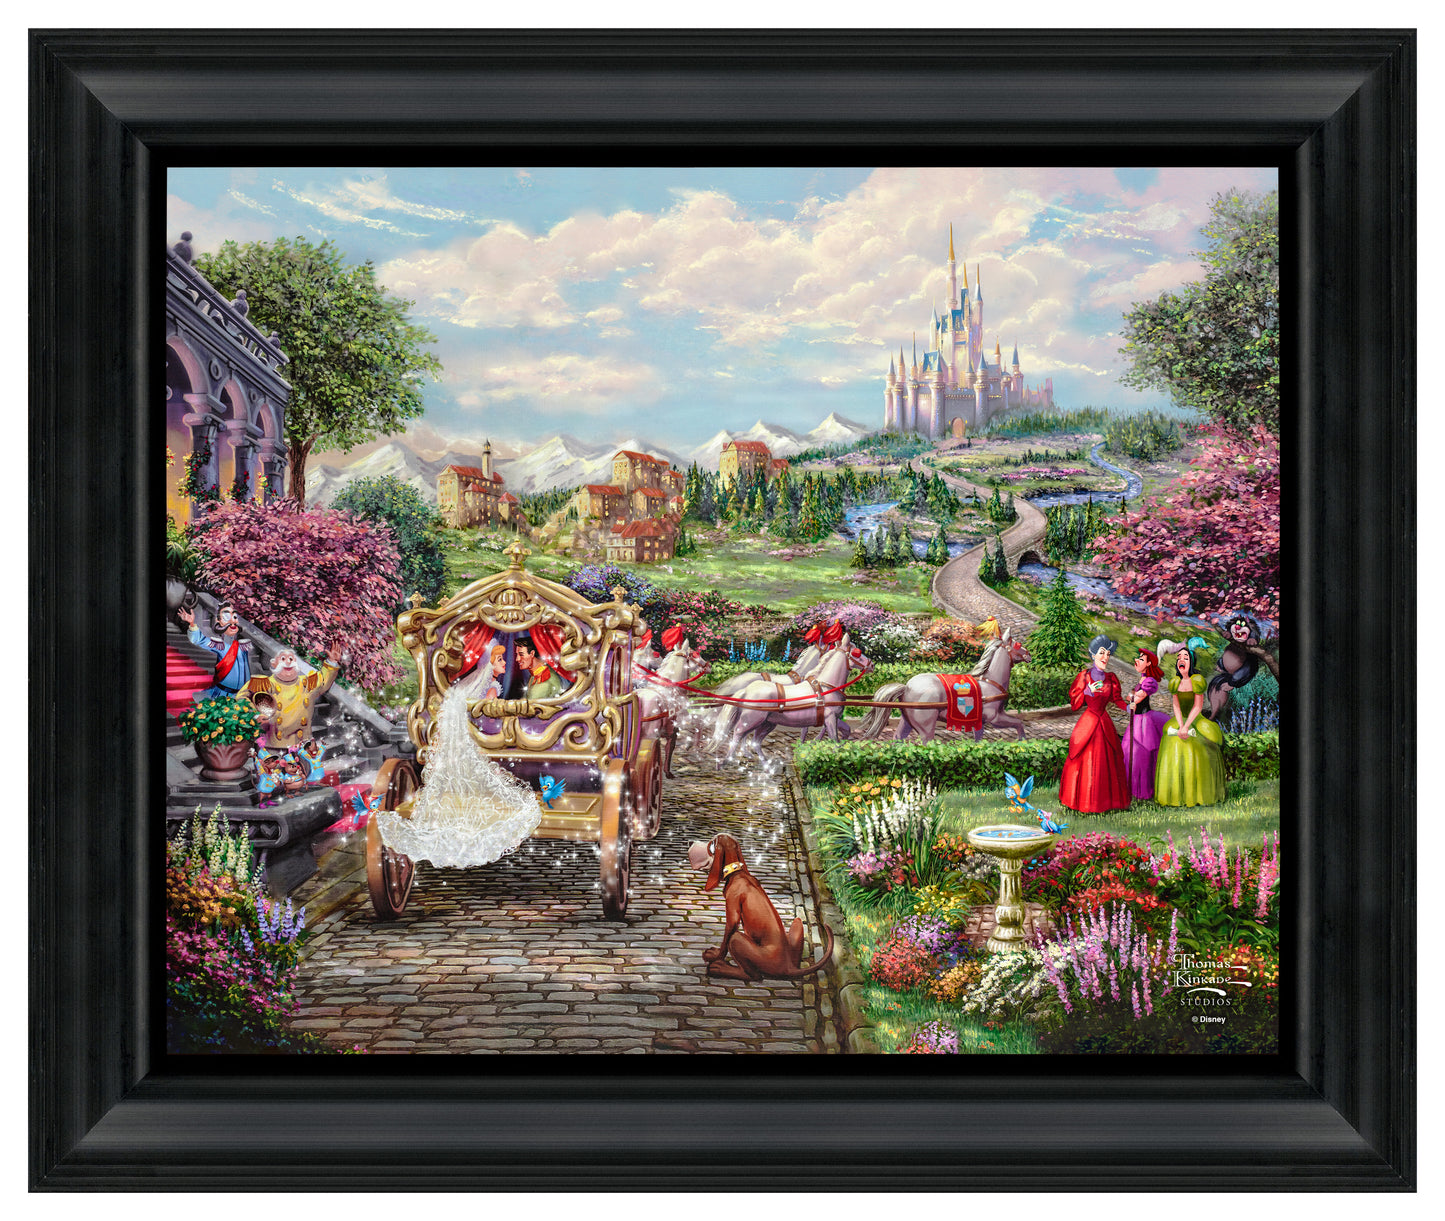 Features Cinderella and Prince Charming together in the mix of all the storyline characters in the background.